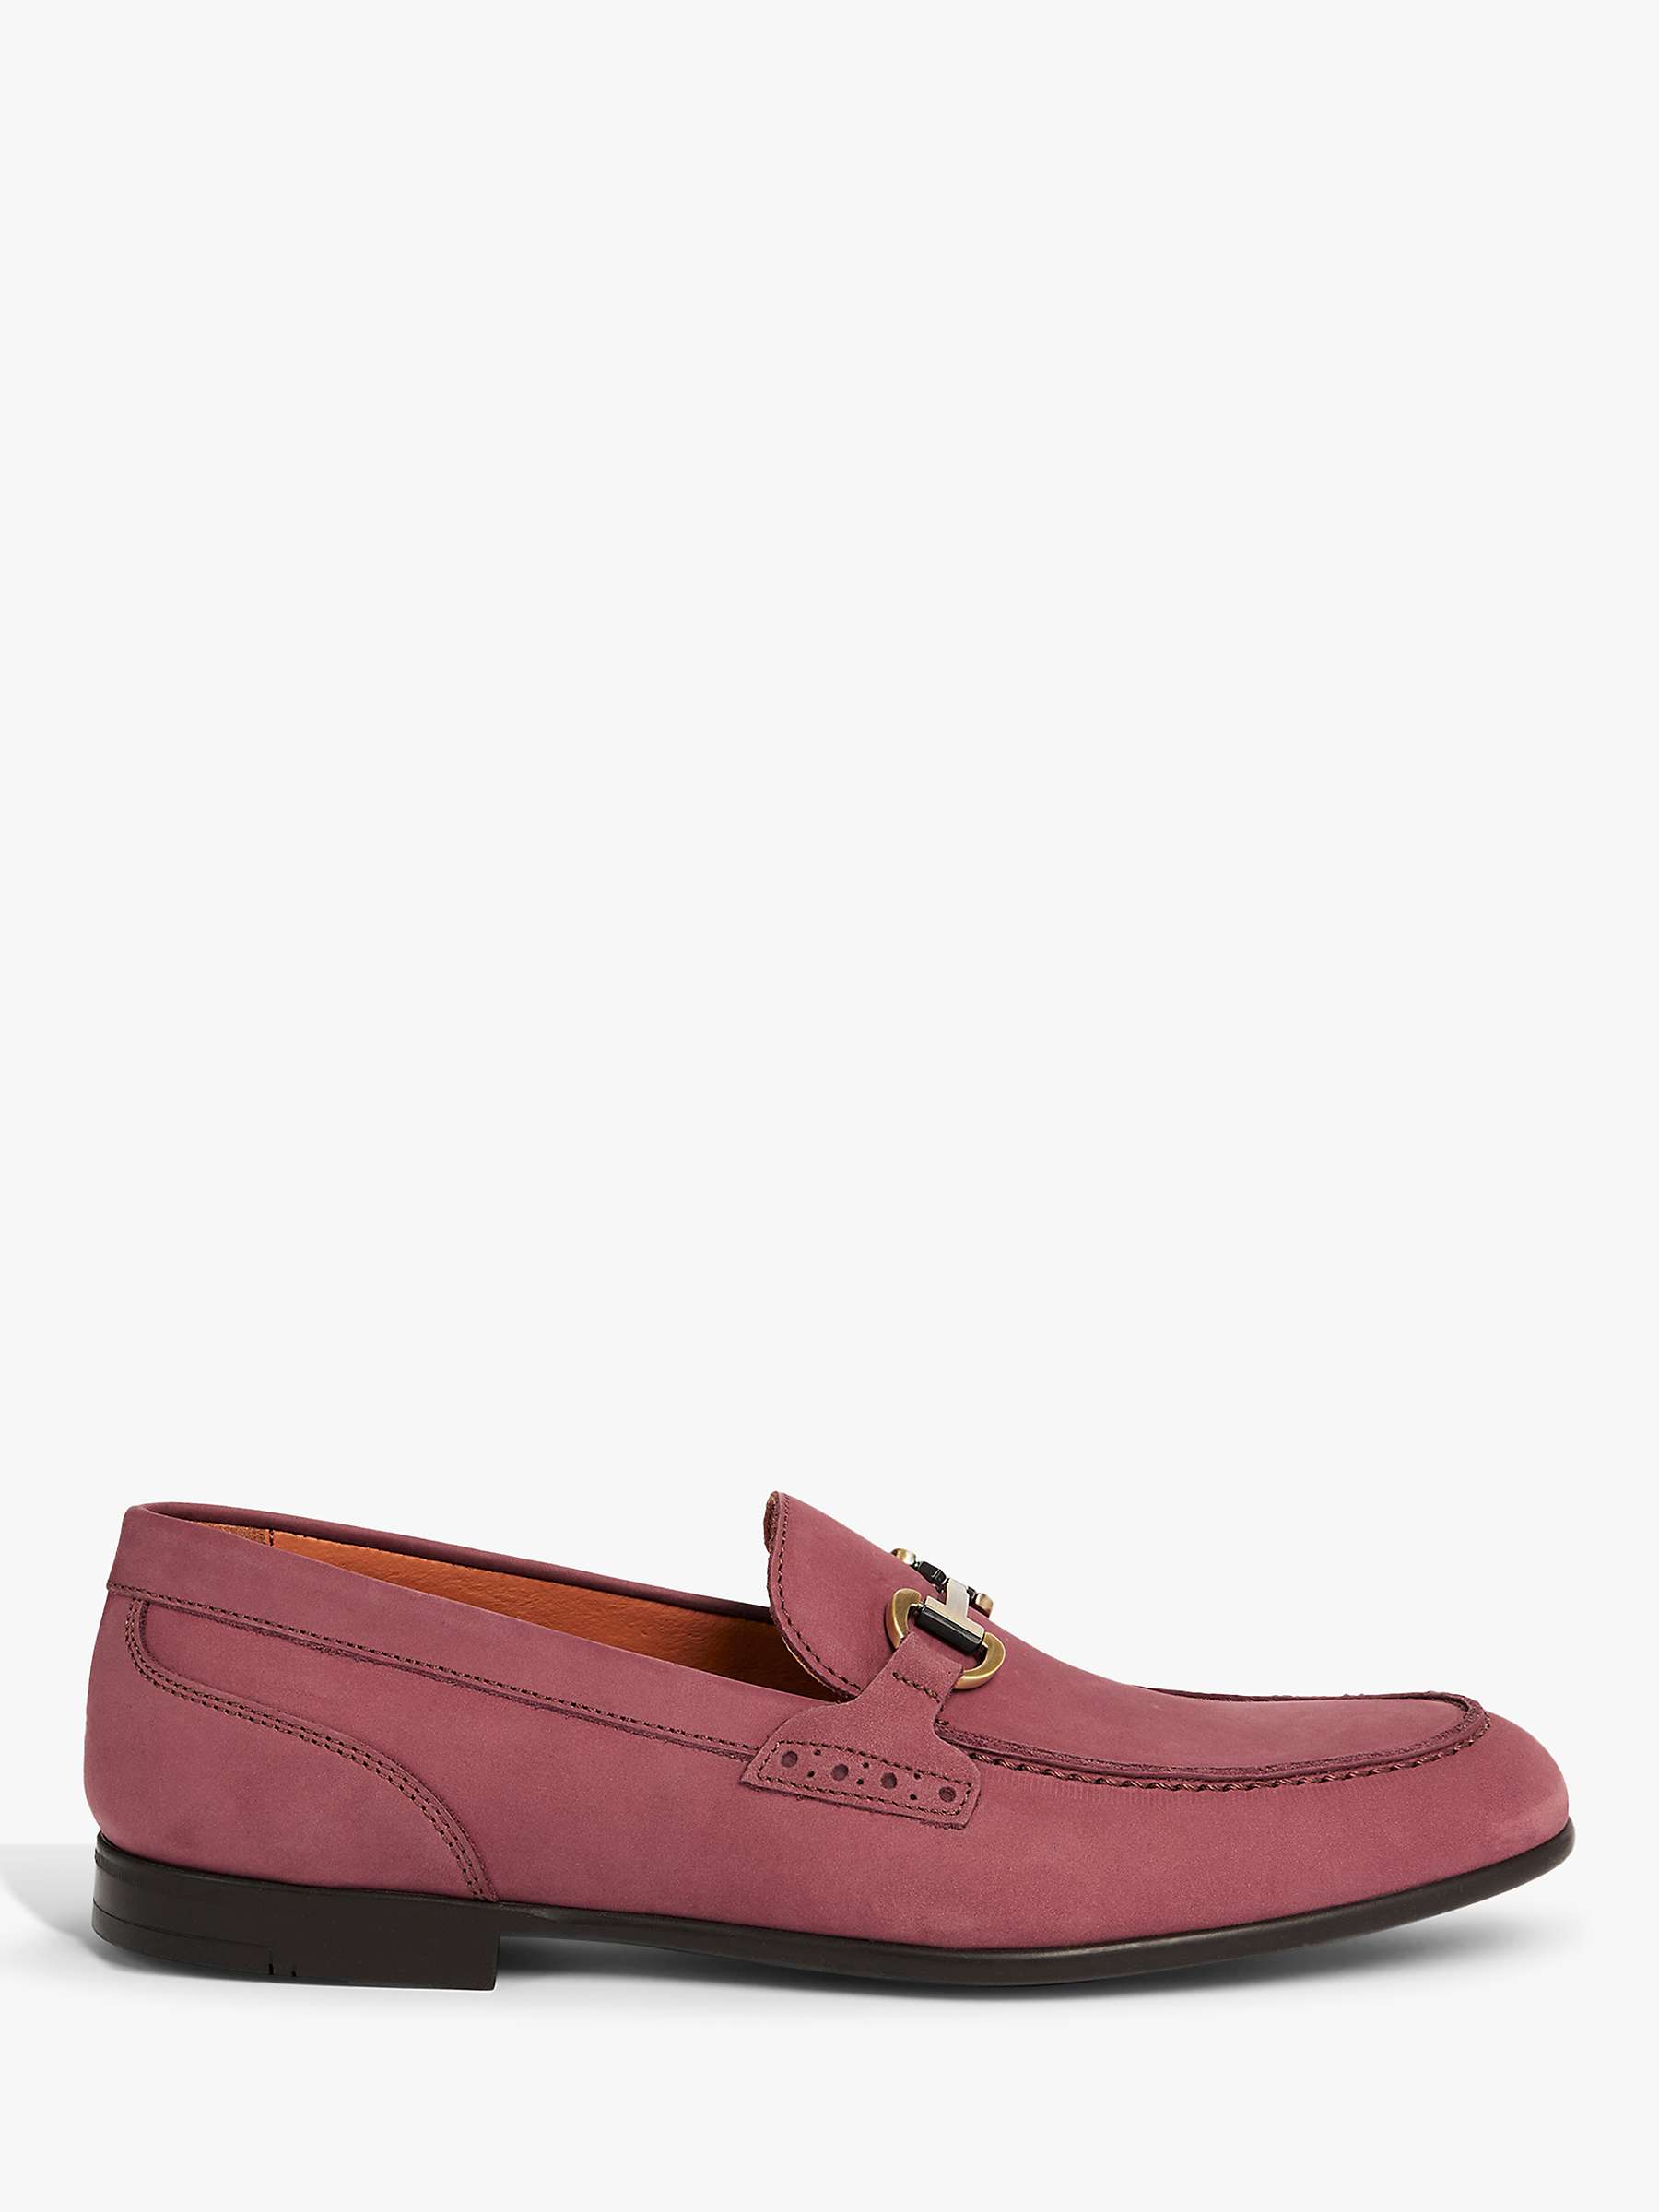 Ted Baker Rayzin Saddle Loafers, Light Pink at John Lewis & Partners